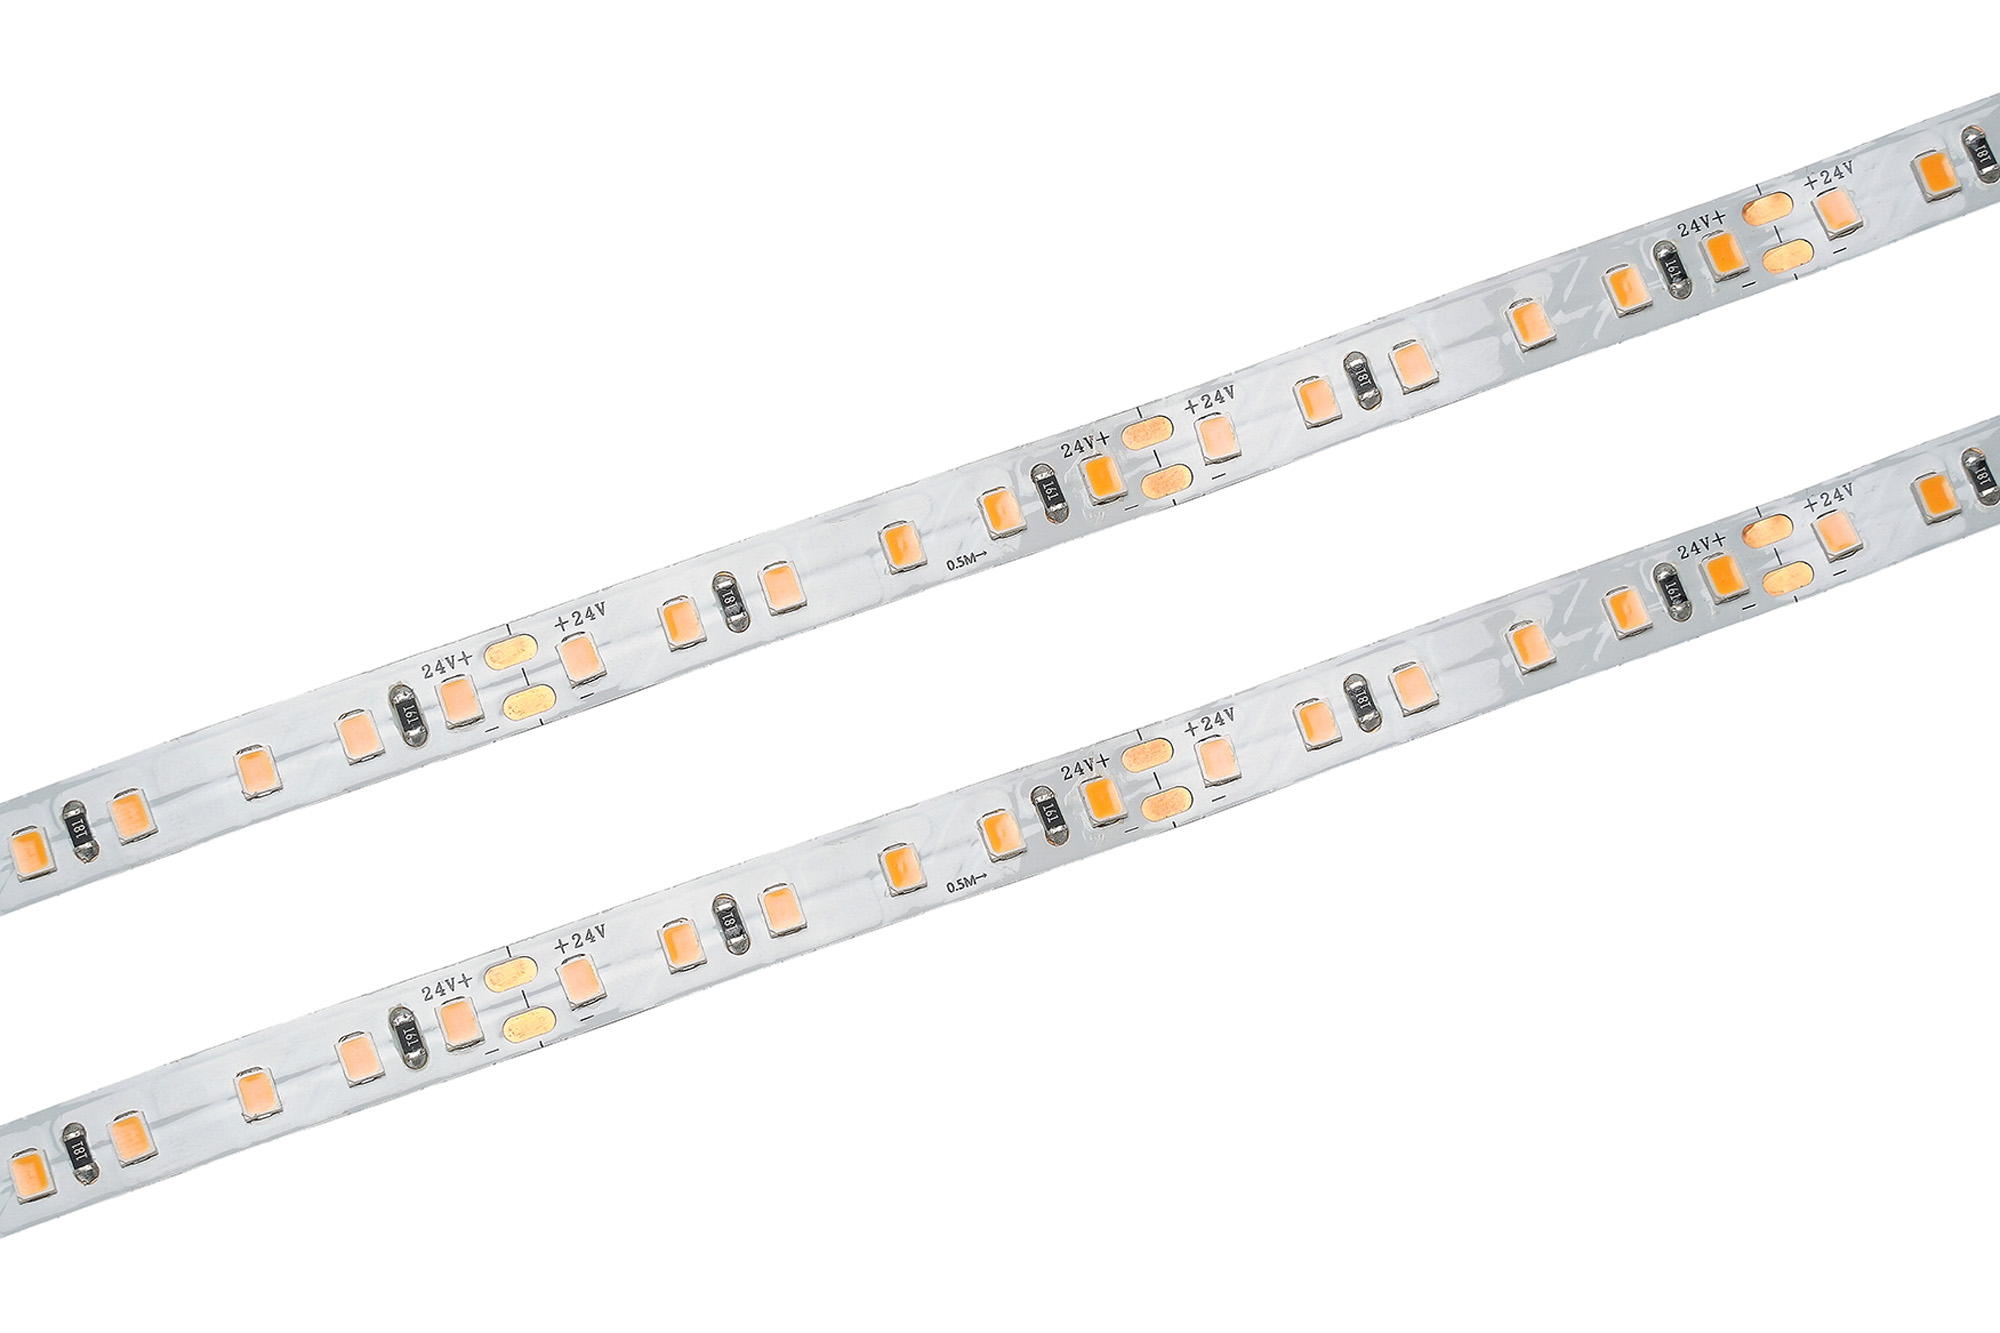 DX700114  Axios Select, 5mx10mm, 24V, 48W , LED Strip 700lm/m 2200K  IP20,